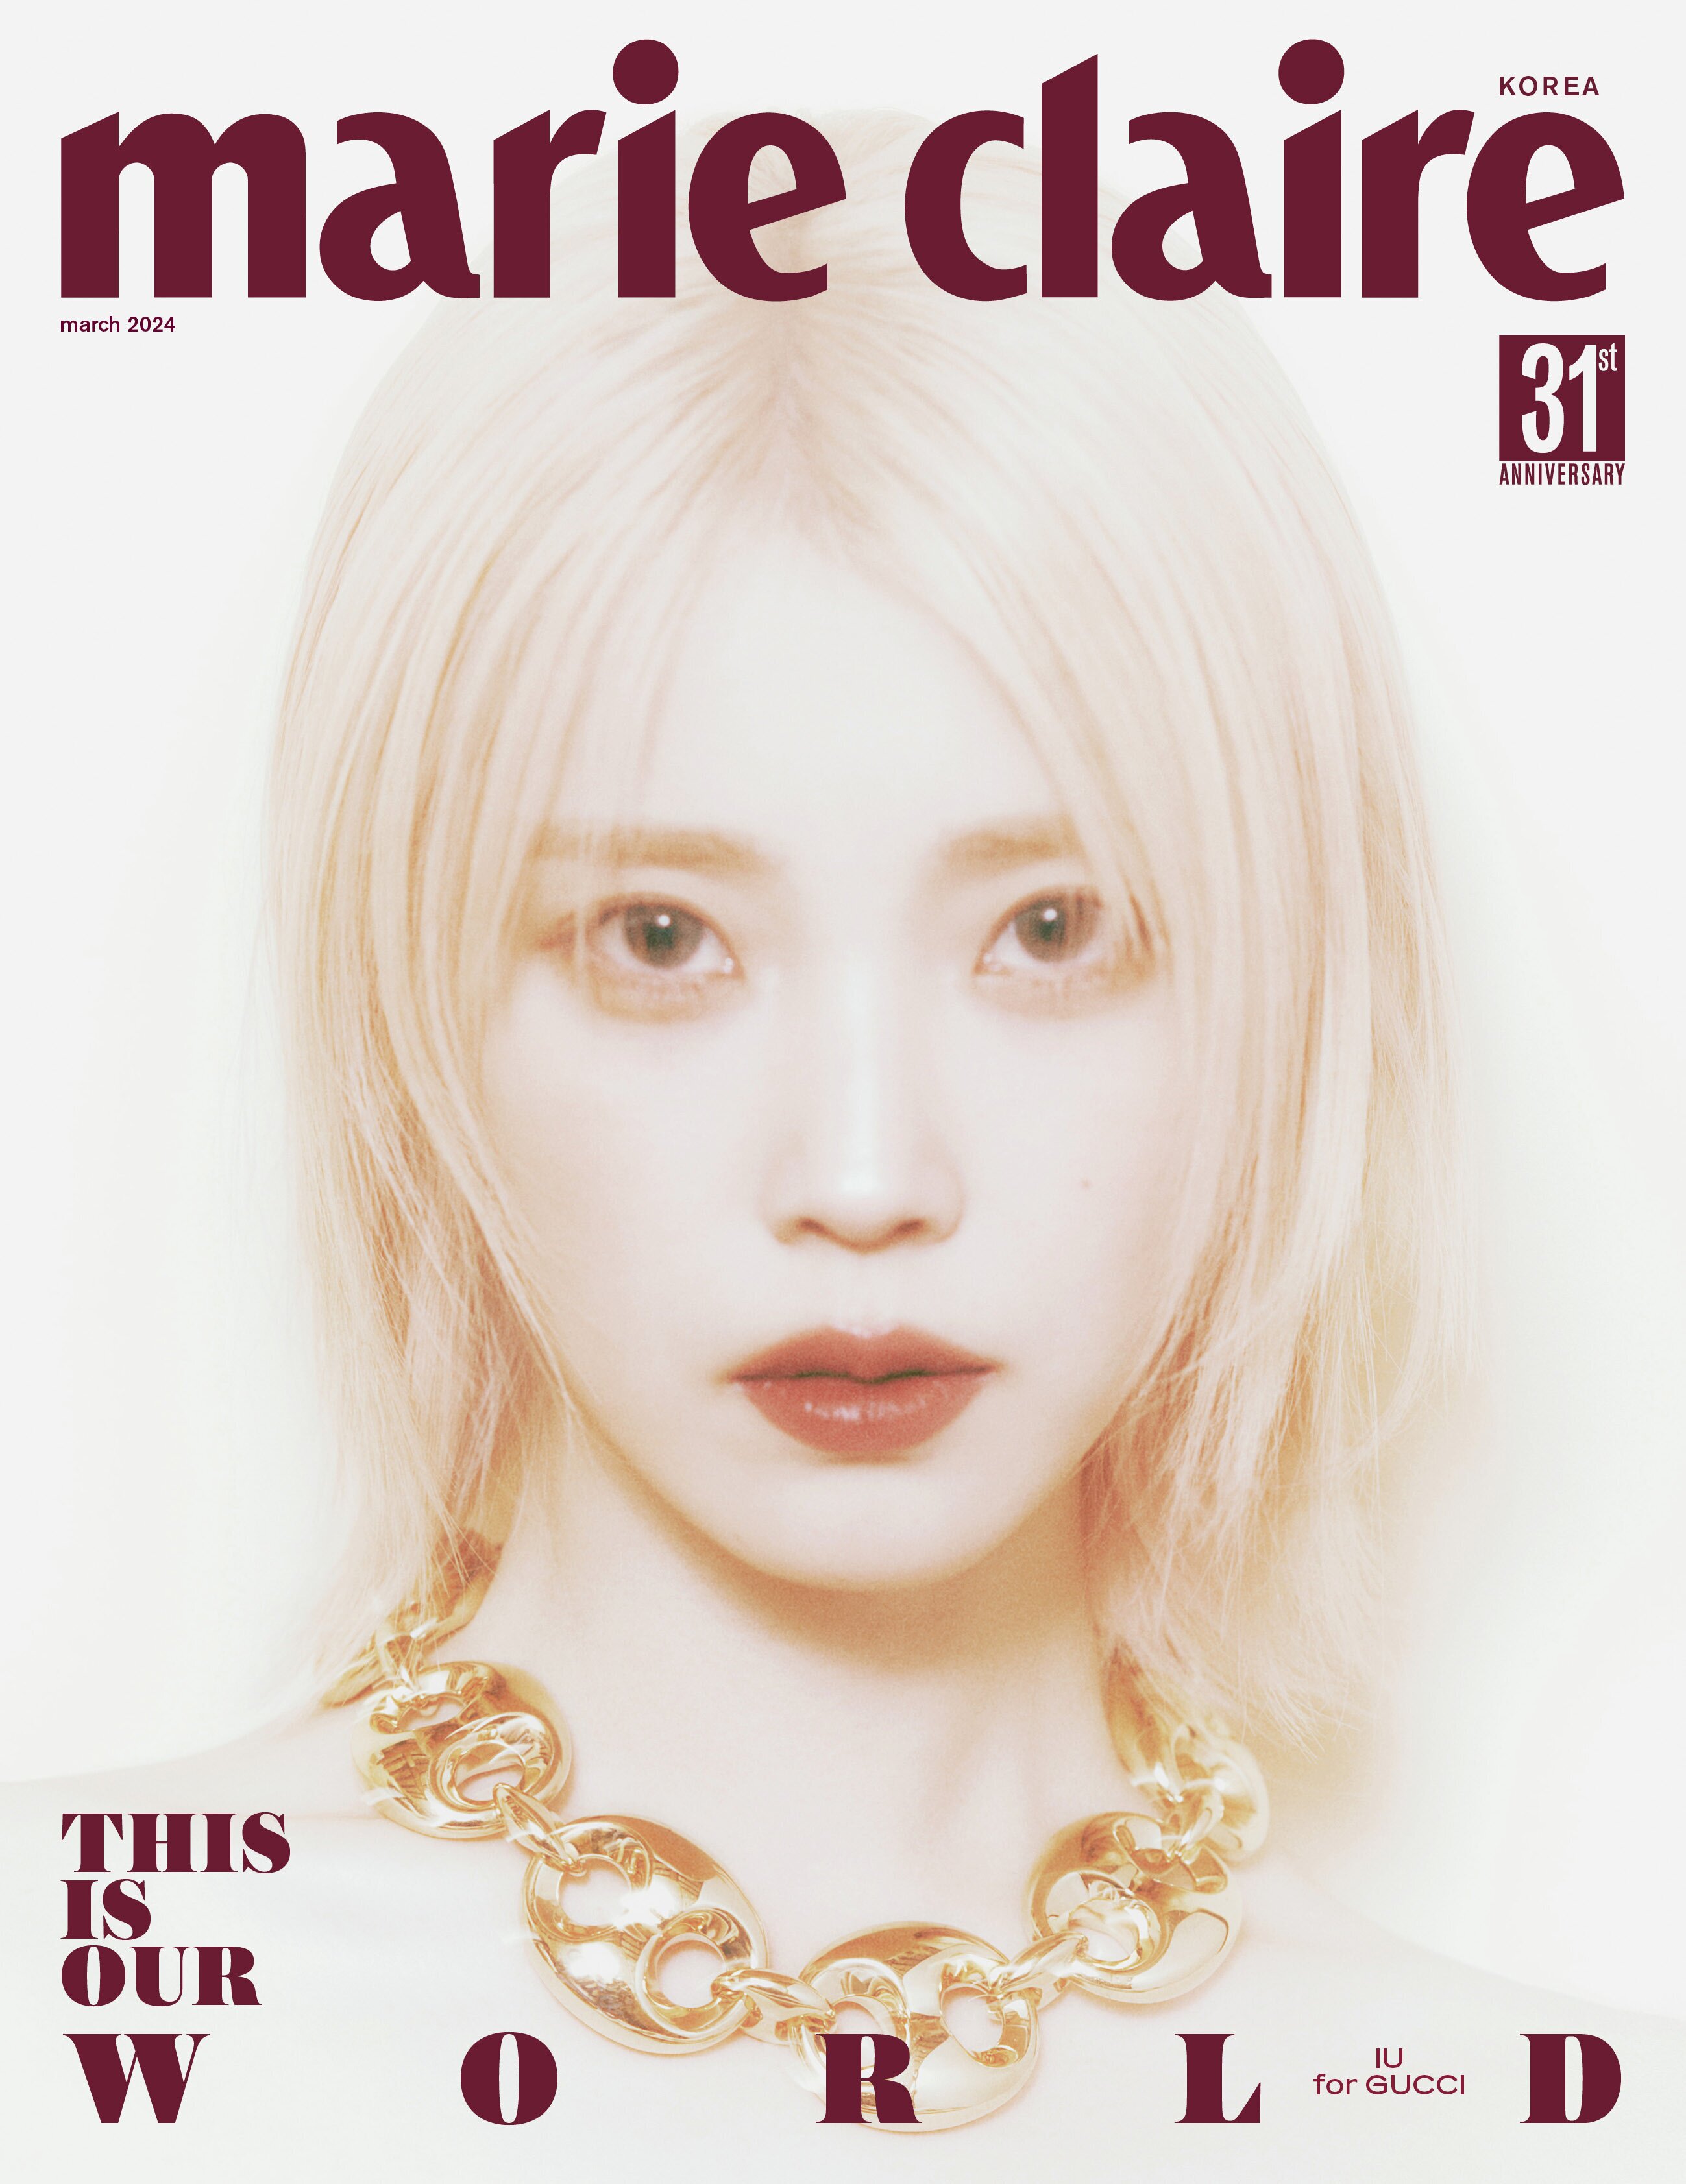 IU x Gucci for Marie Claire Korea March 2024 Issue